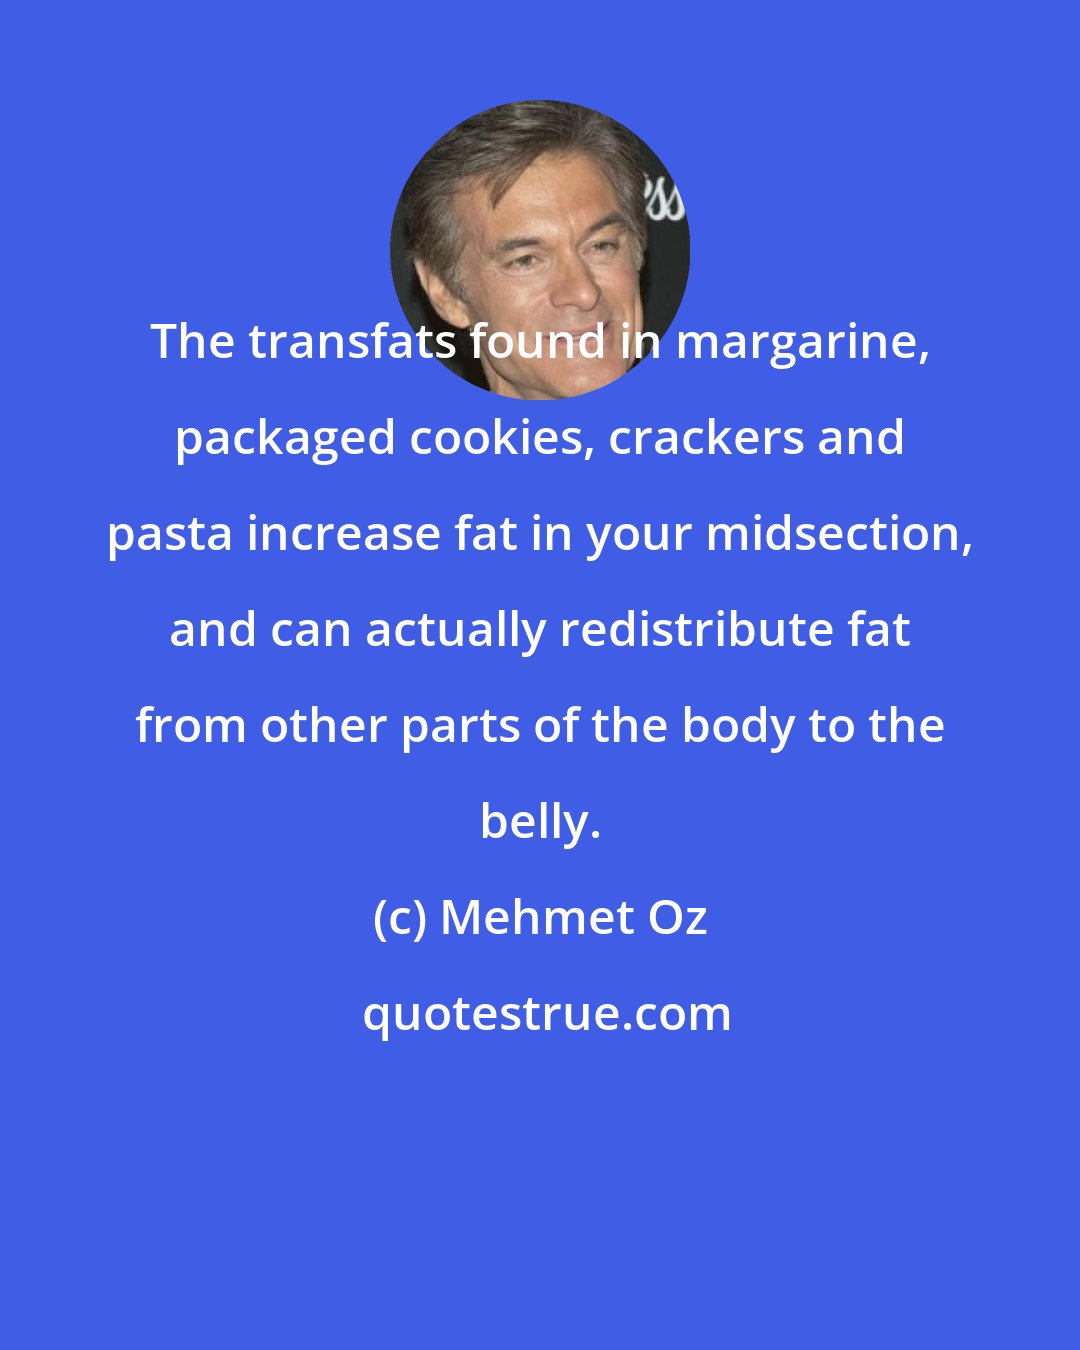 Mehmet Oz: The transfats found in margarine, packaged cookies, crackers and pasta increase fat in your midsection, and can actually redistribute fat from other parts of the body to the belly.